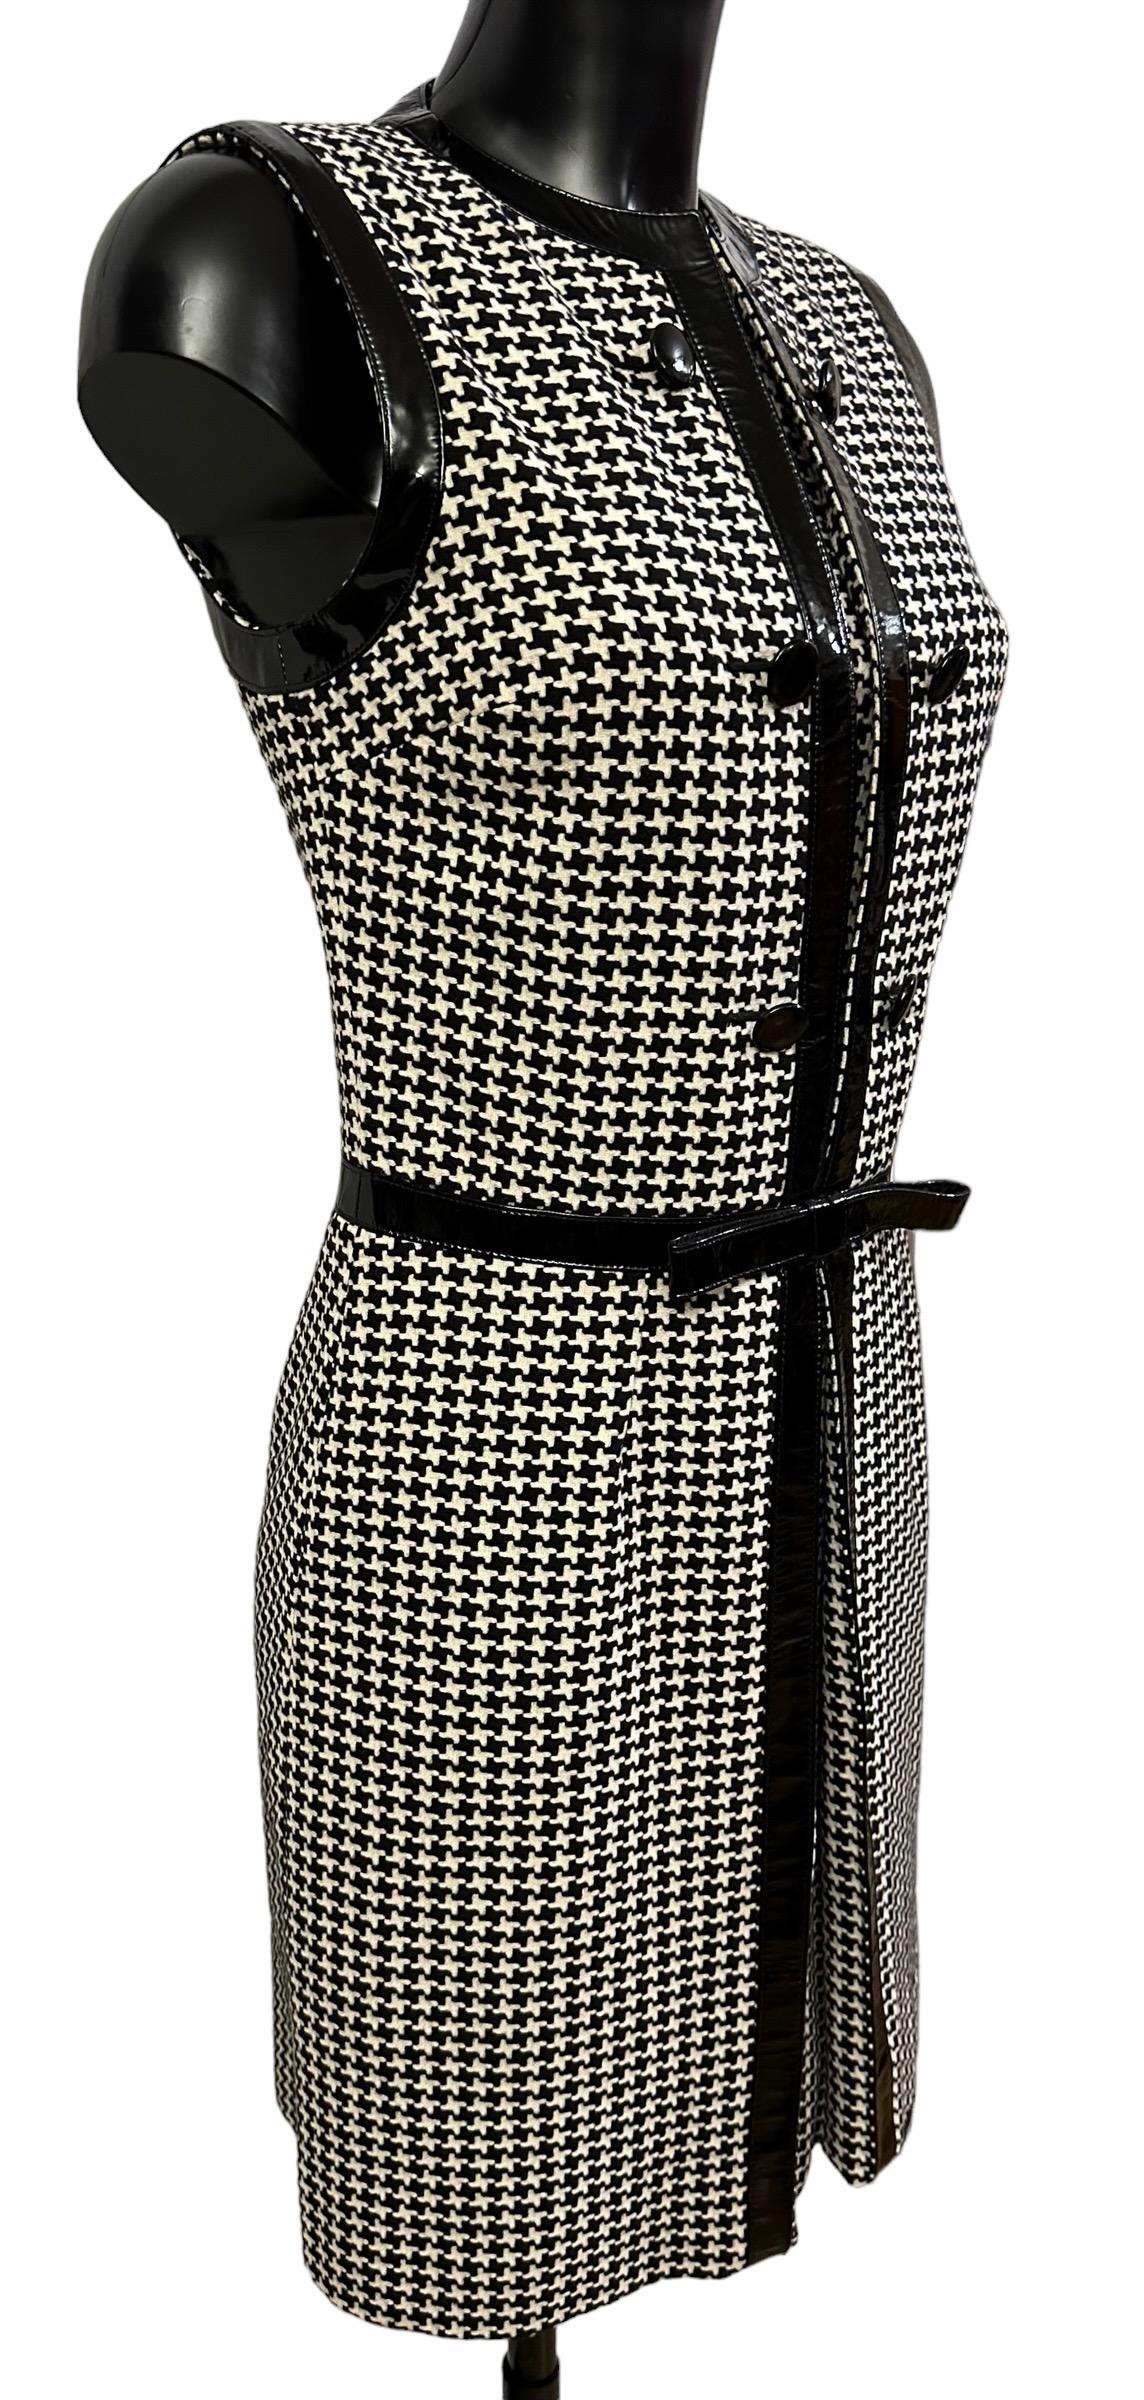 Christian Dior Fall 2008 Black and Off-white Houndstooth Dress by John Galliano For Sale 1